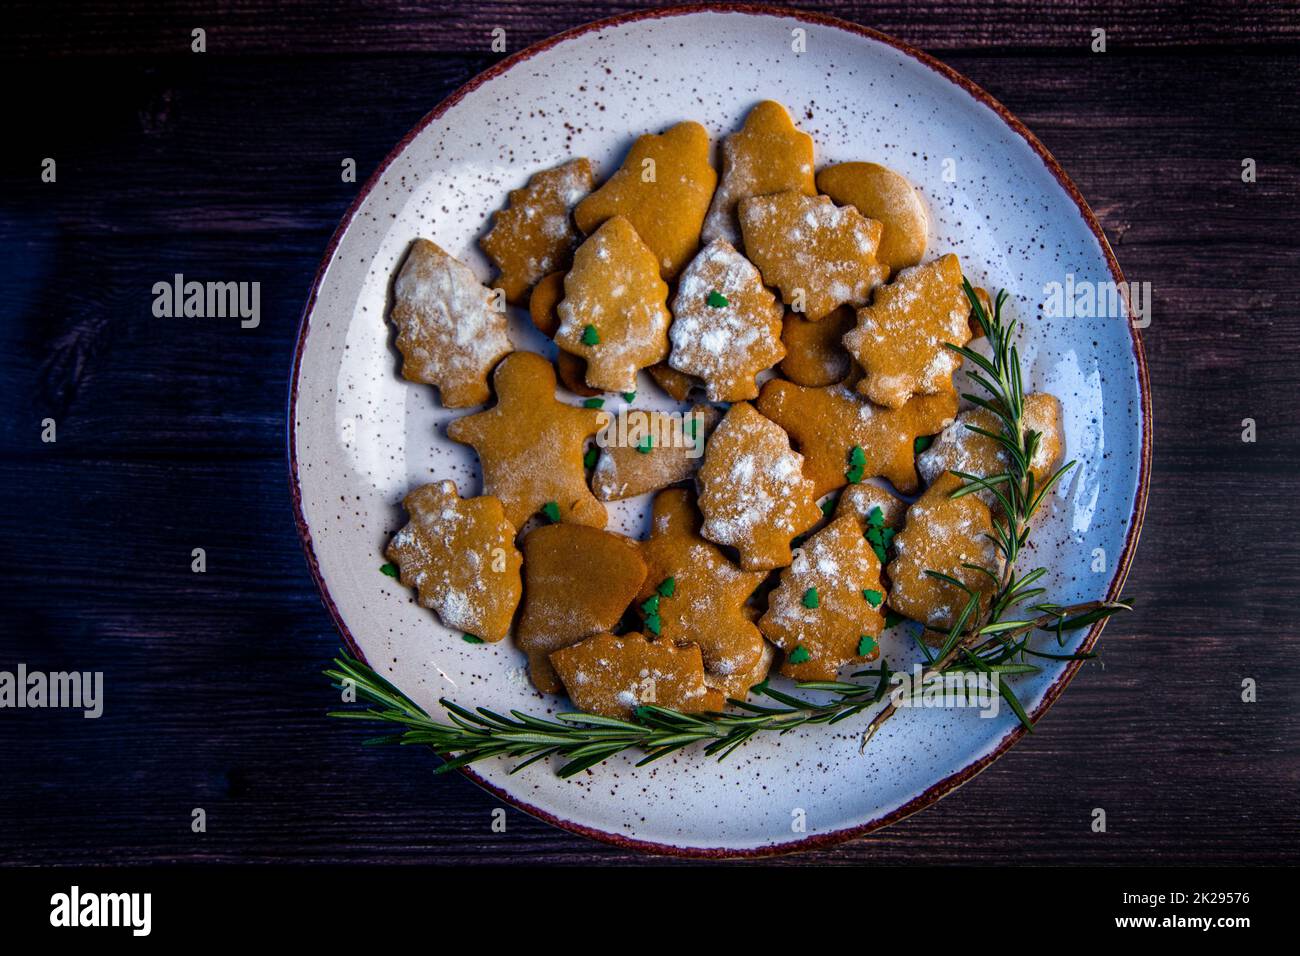 Cookies are on a plate of different shapes, in the foreground there is a cookie in the form of a Christmas tree, decorated with powdered sugar like snow and small green Christmas trees against the background of the rest of the cookies, a branch of rosemar Stock Photo